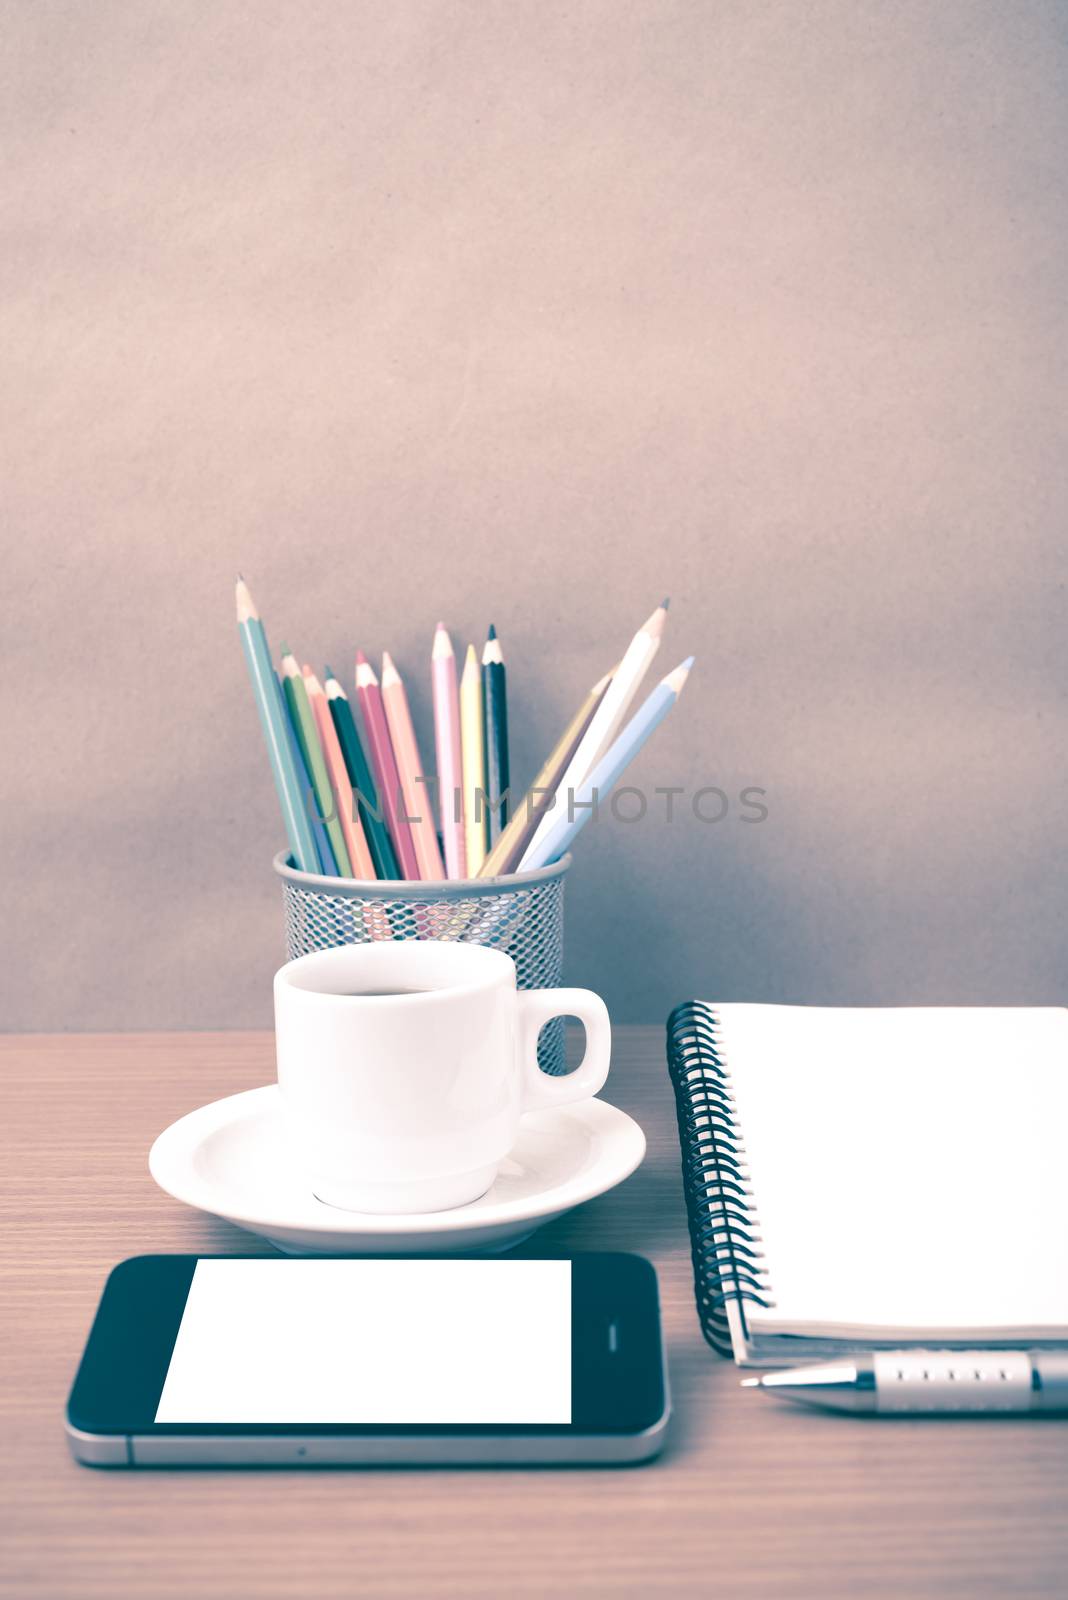 coffe,phone,notepad and color pencil on wood table background vintage style